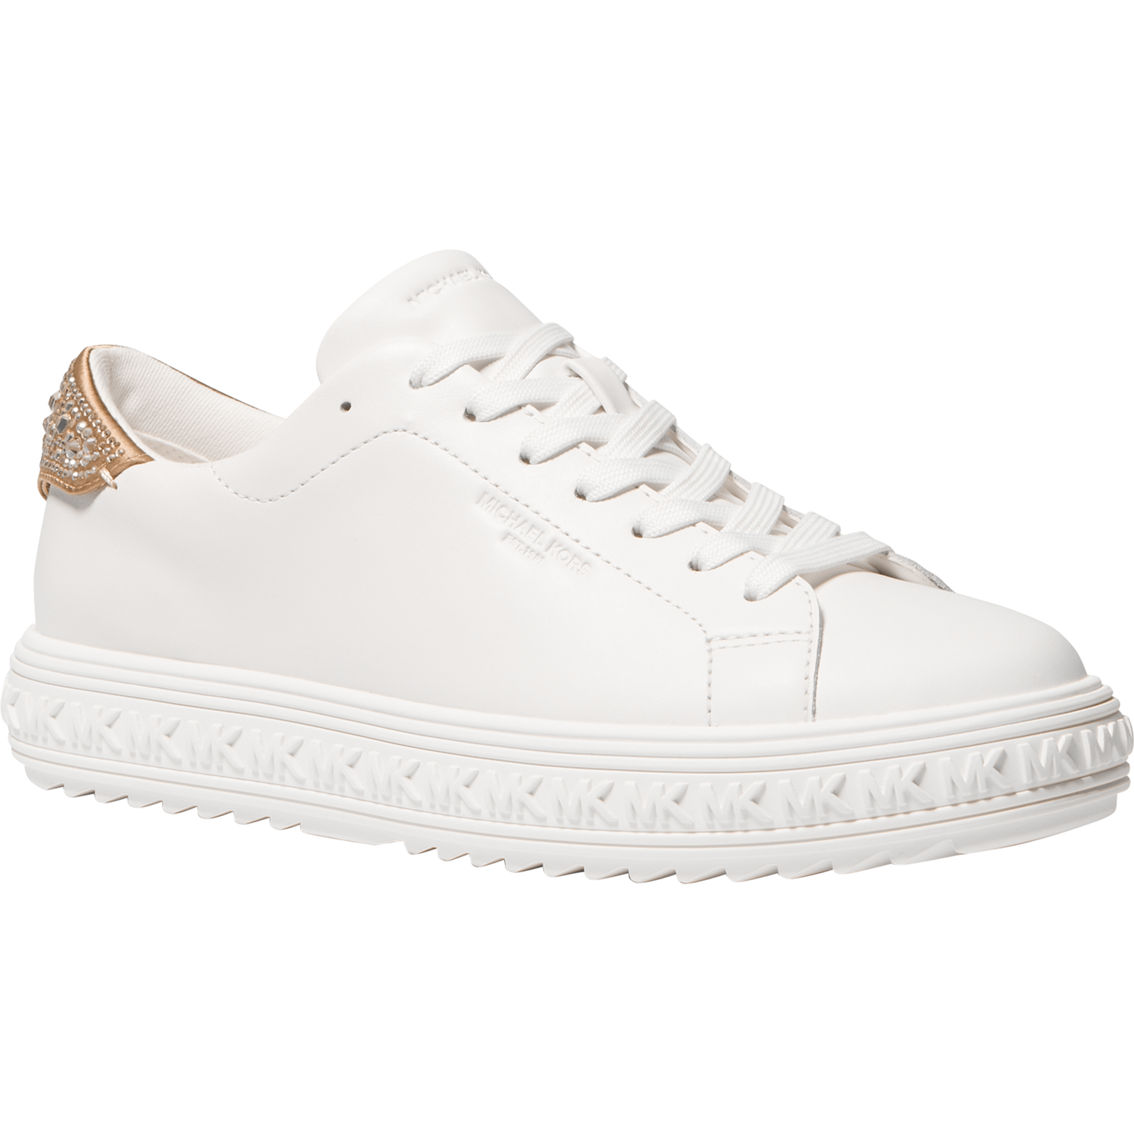 Michael Kors Grove Embellished Leather Sneakers | Sneakers | Shoes ...